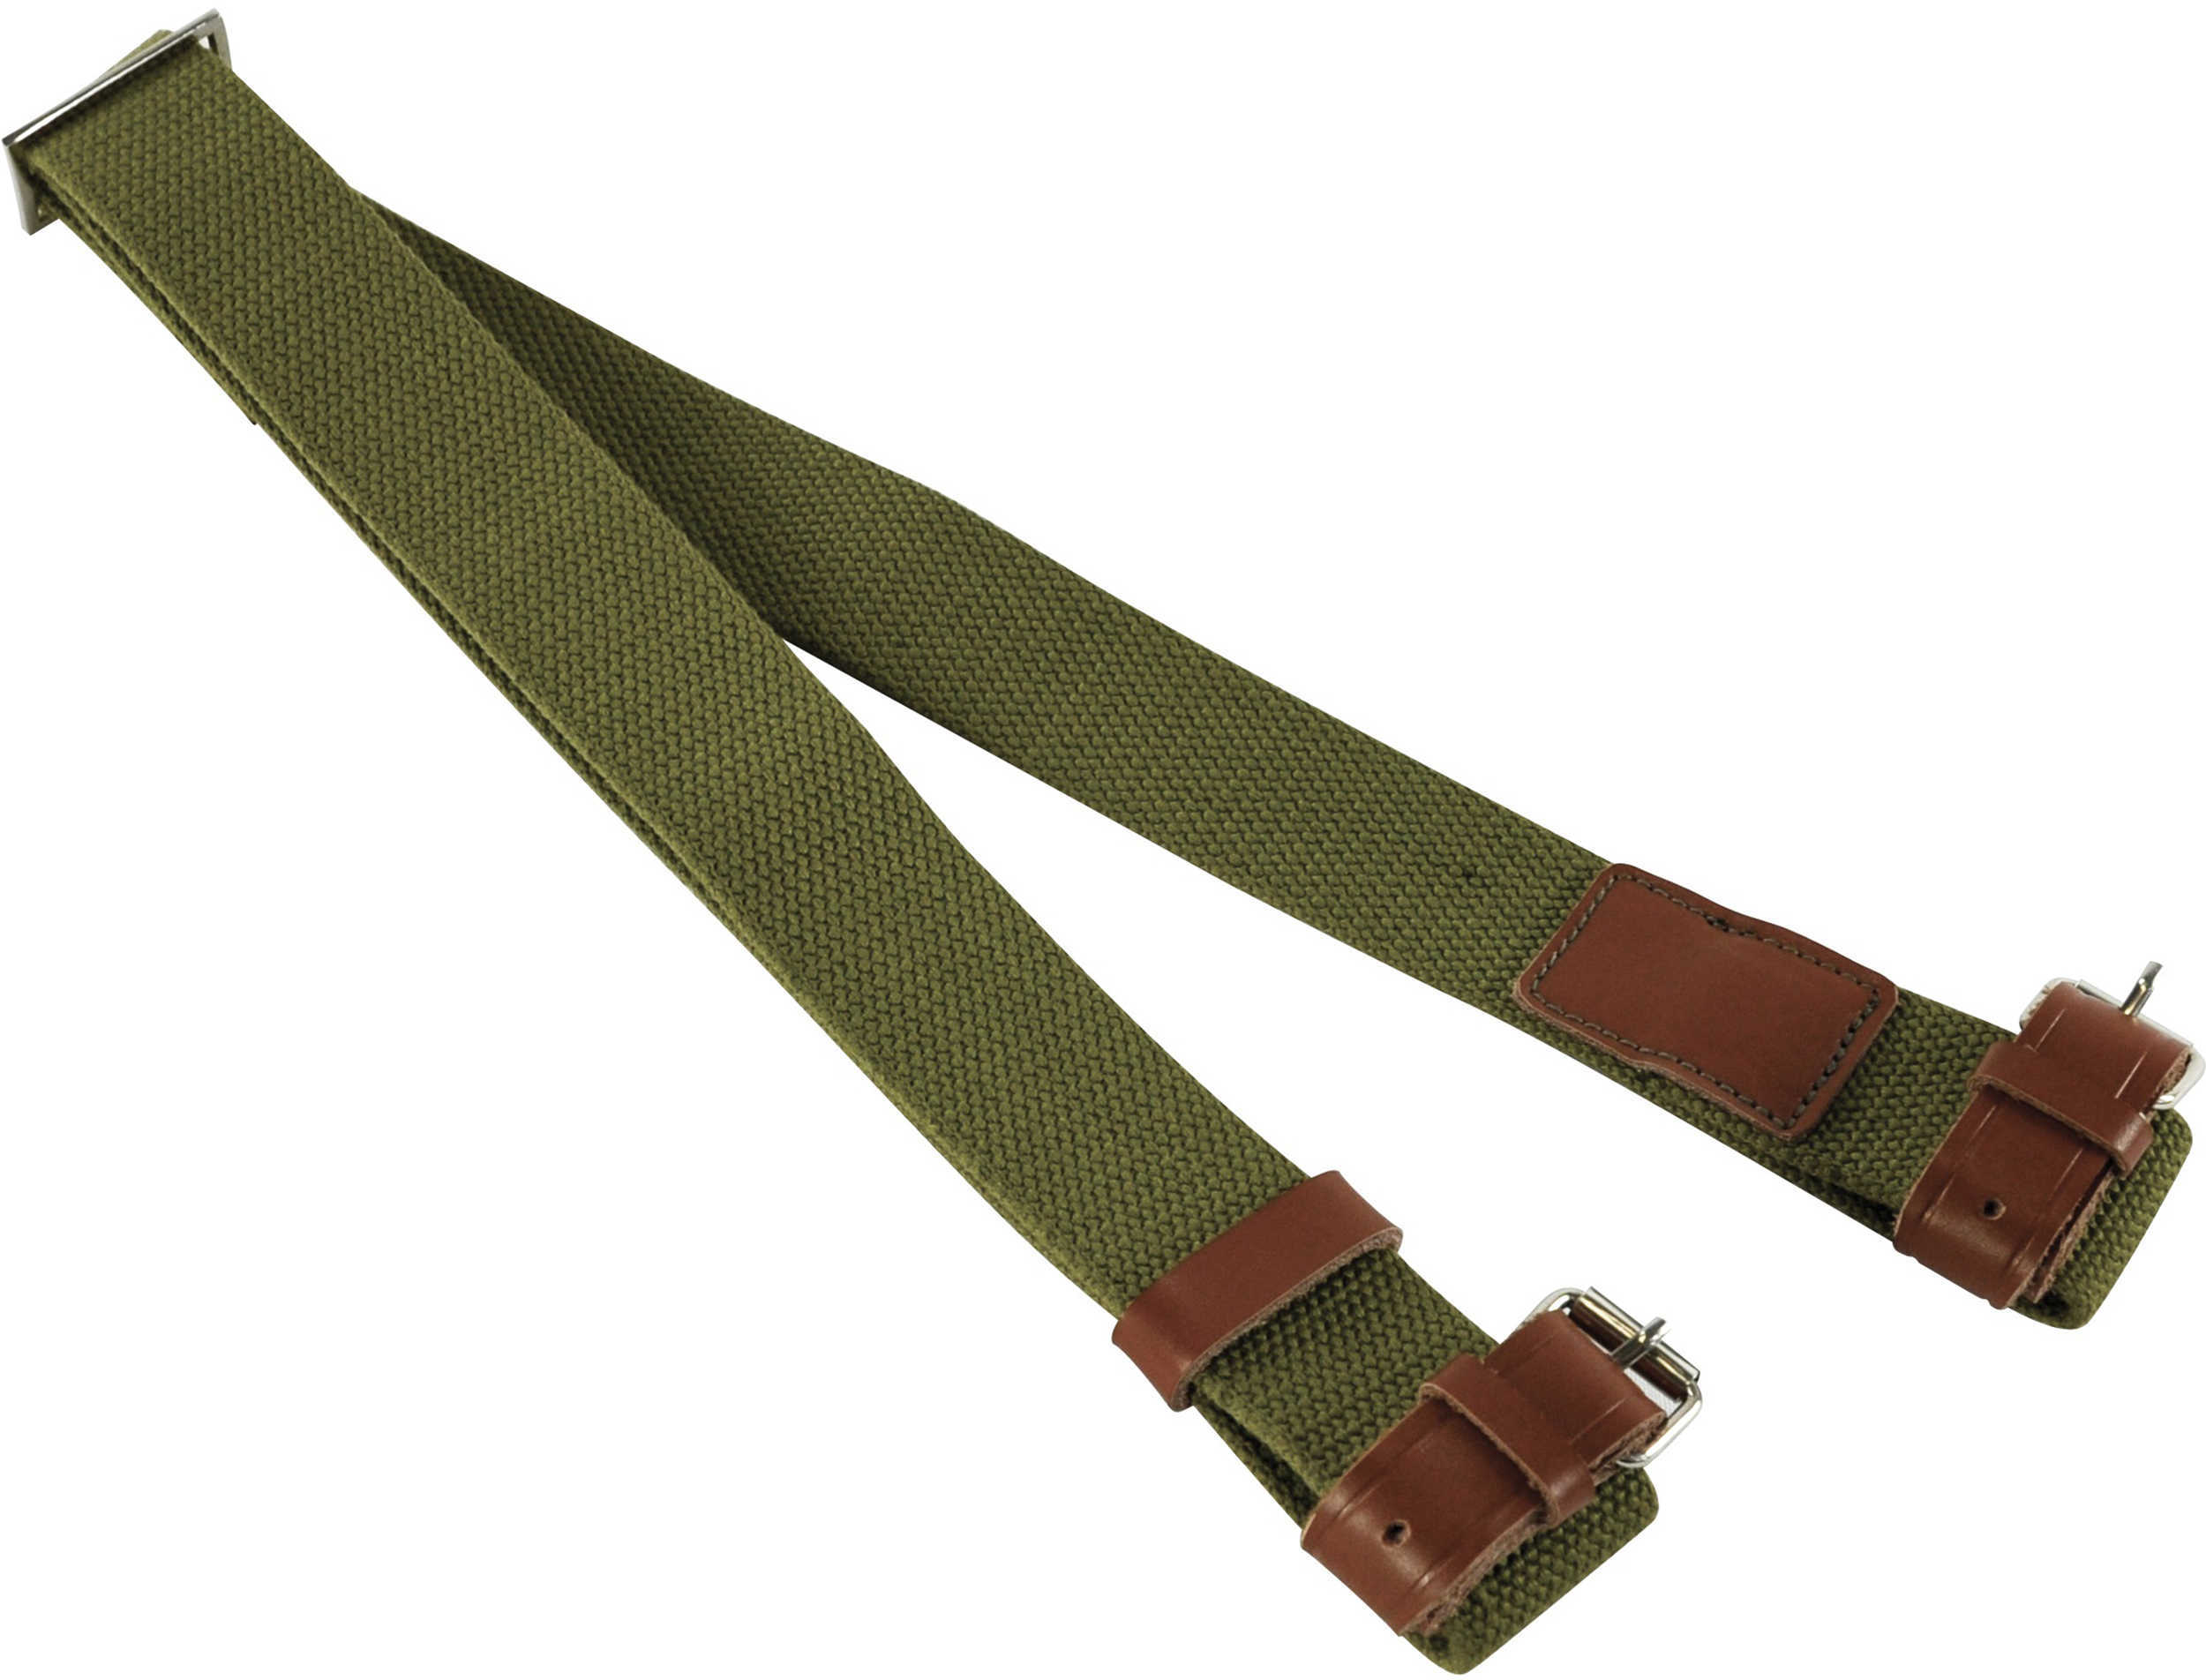 NCSTAR Mosin Nagant Sling Green 39" Length (Fully Extended) 2-Point AAMNS